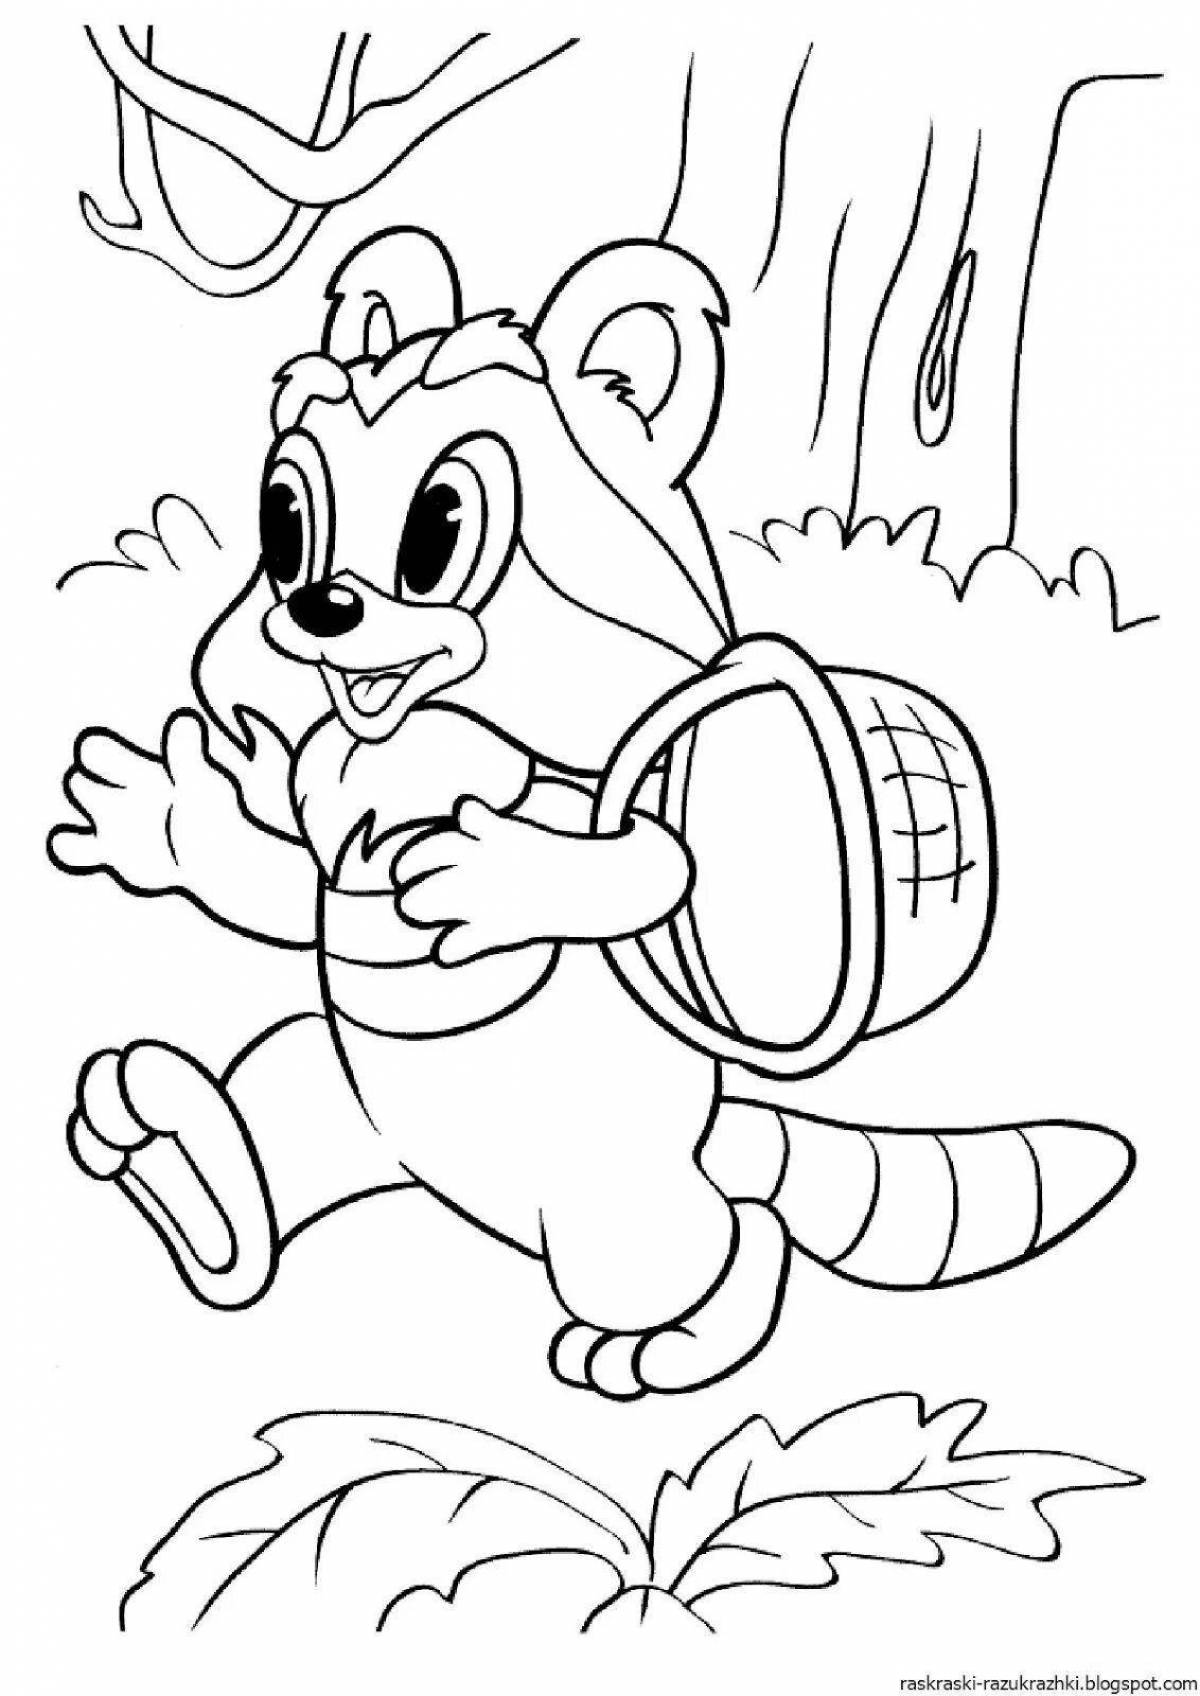 Playful cartoon coloring book for 4-5 year olds